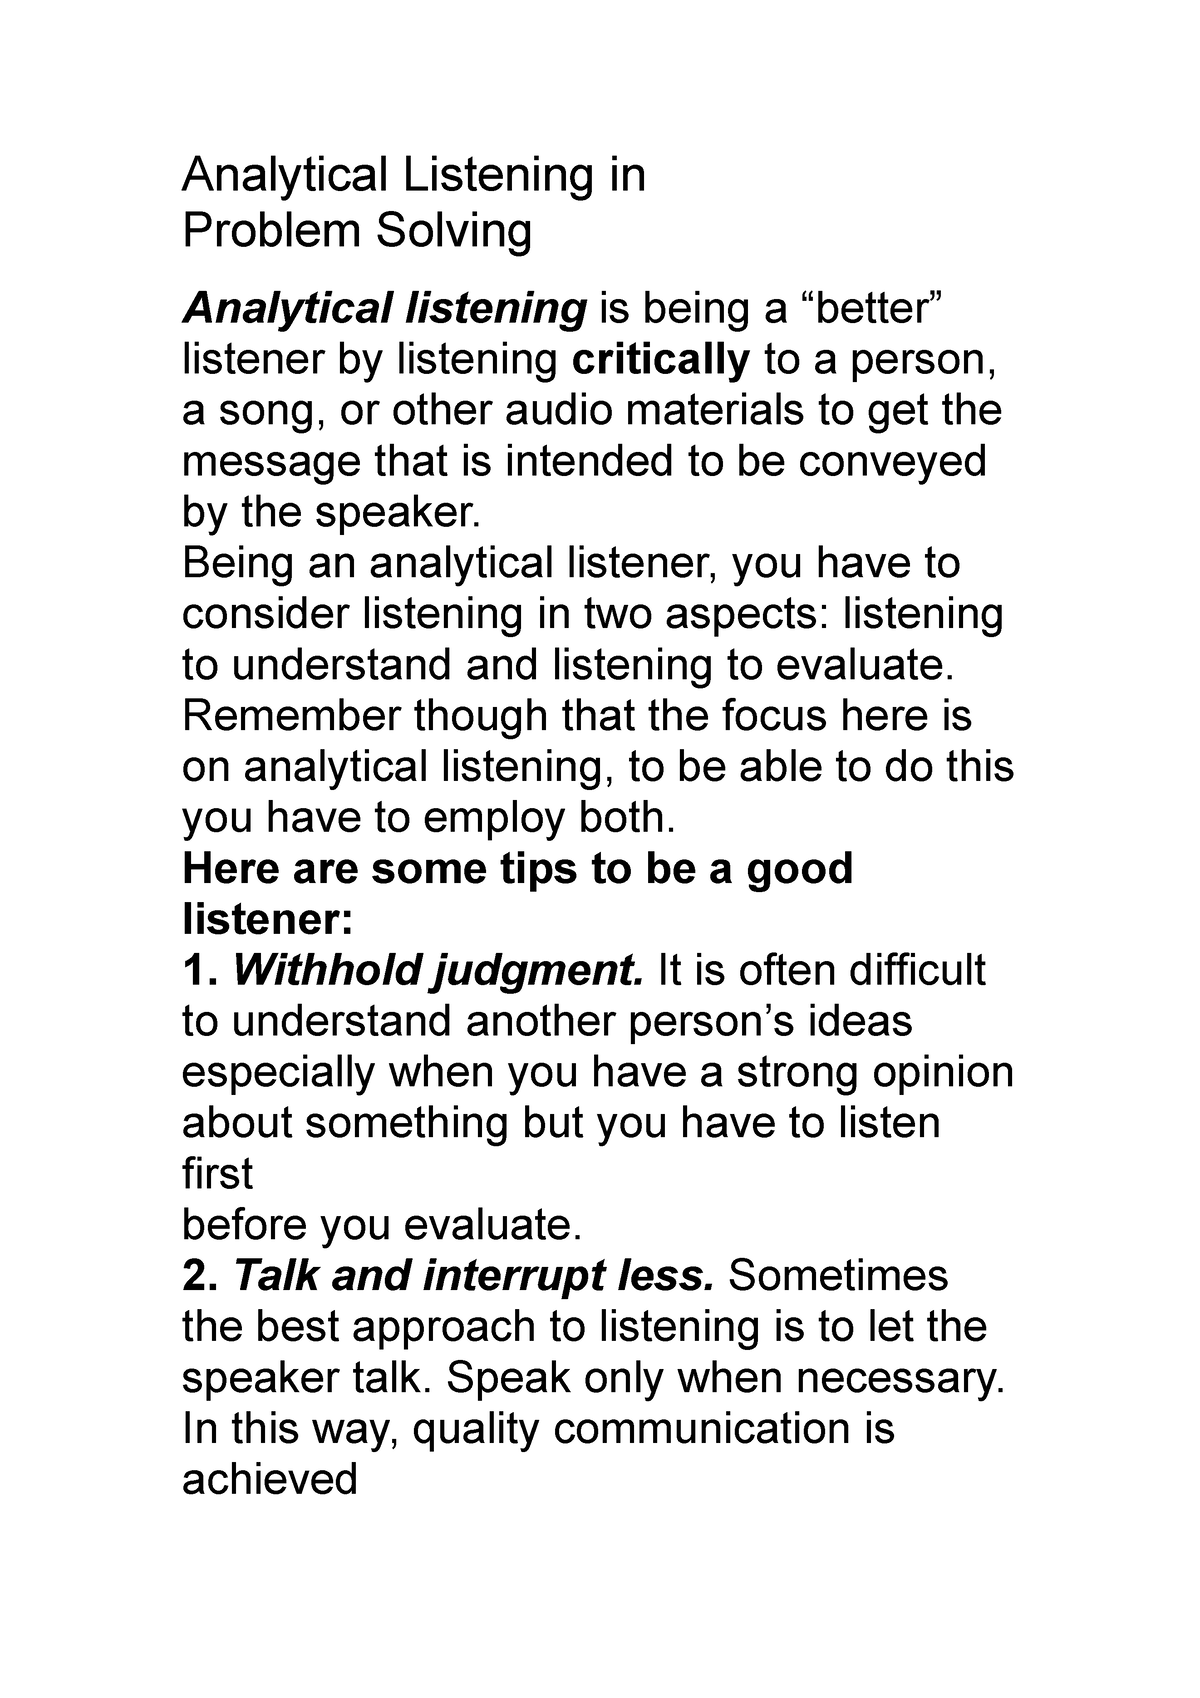 analytical listening in problem solving grade 10 lesson plan